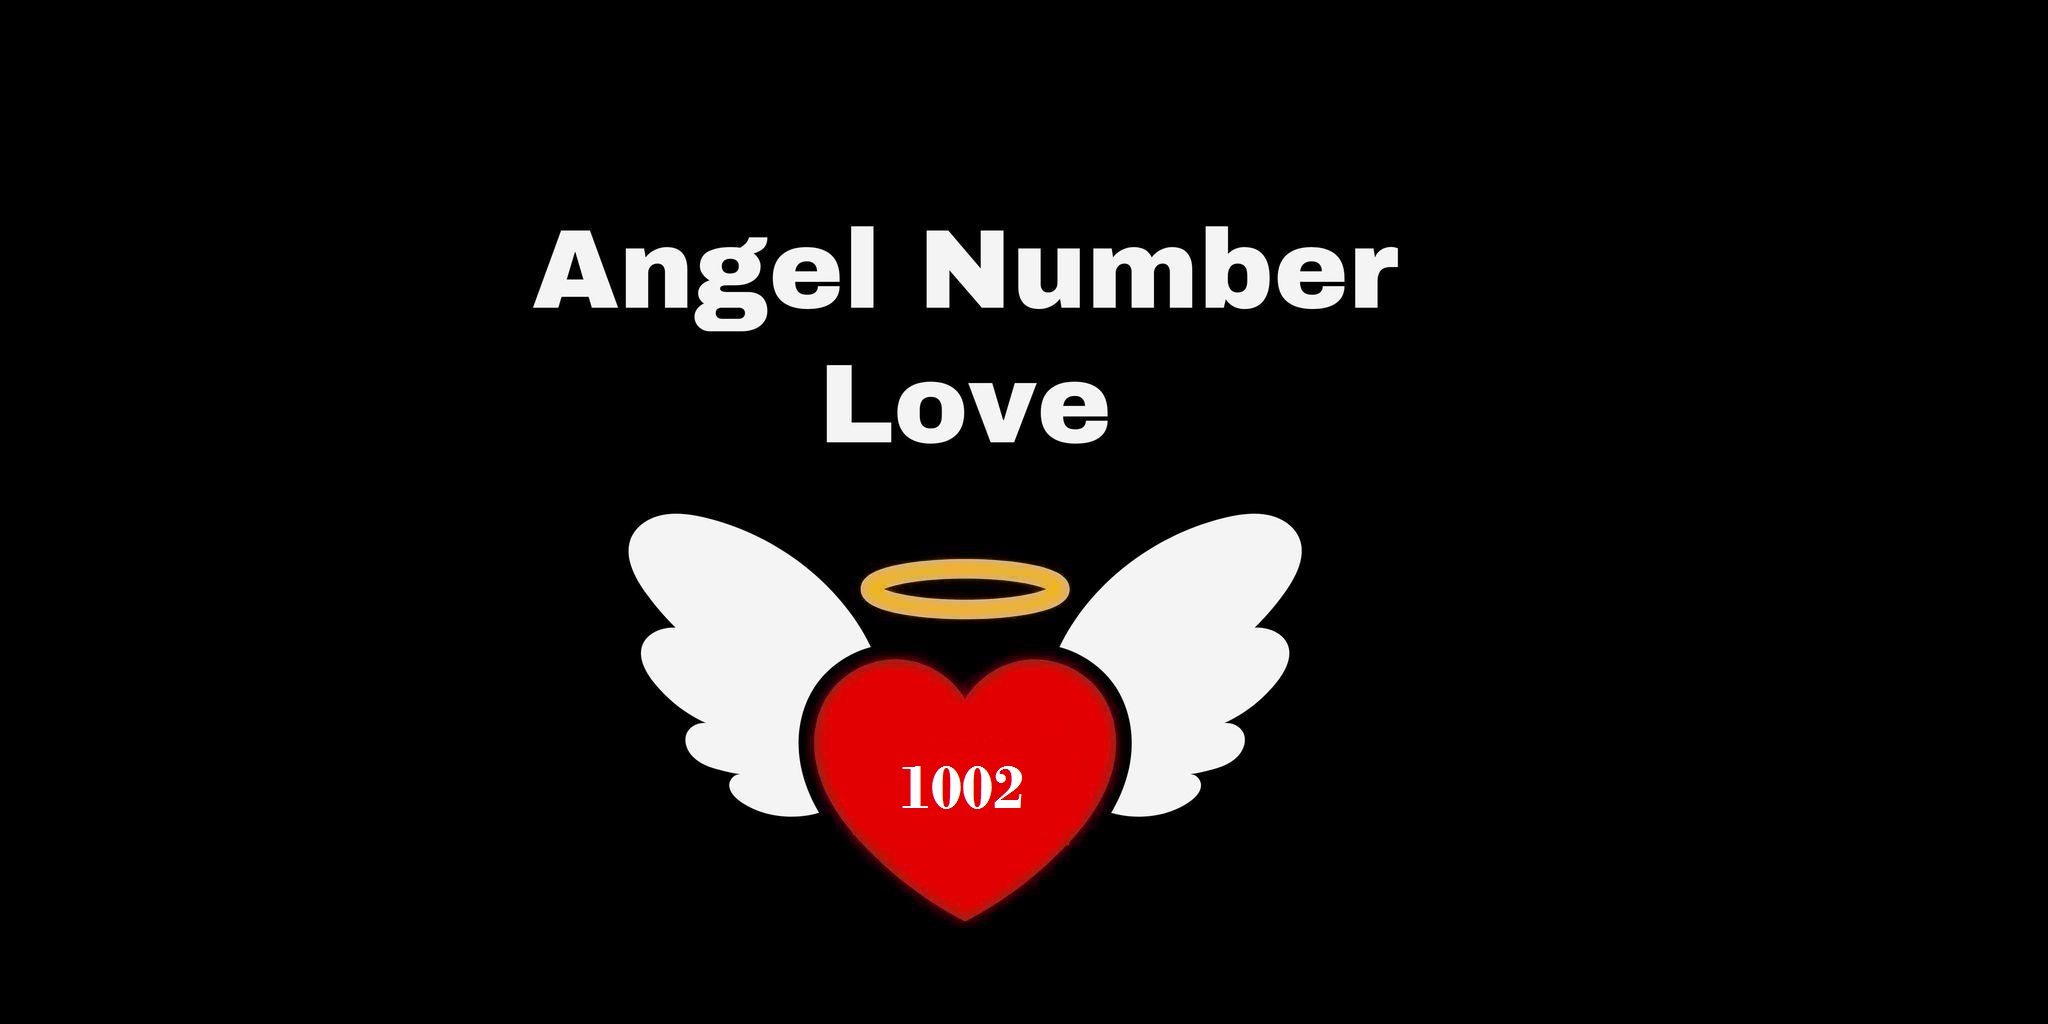 1002 Angel Number Meaning In Love